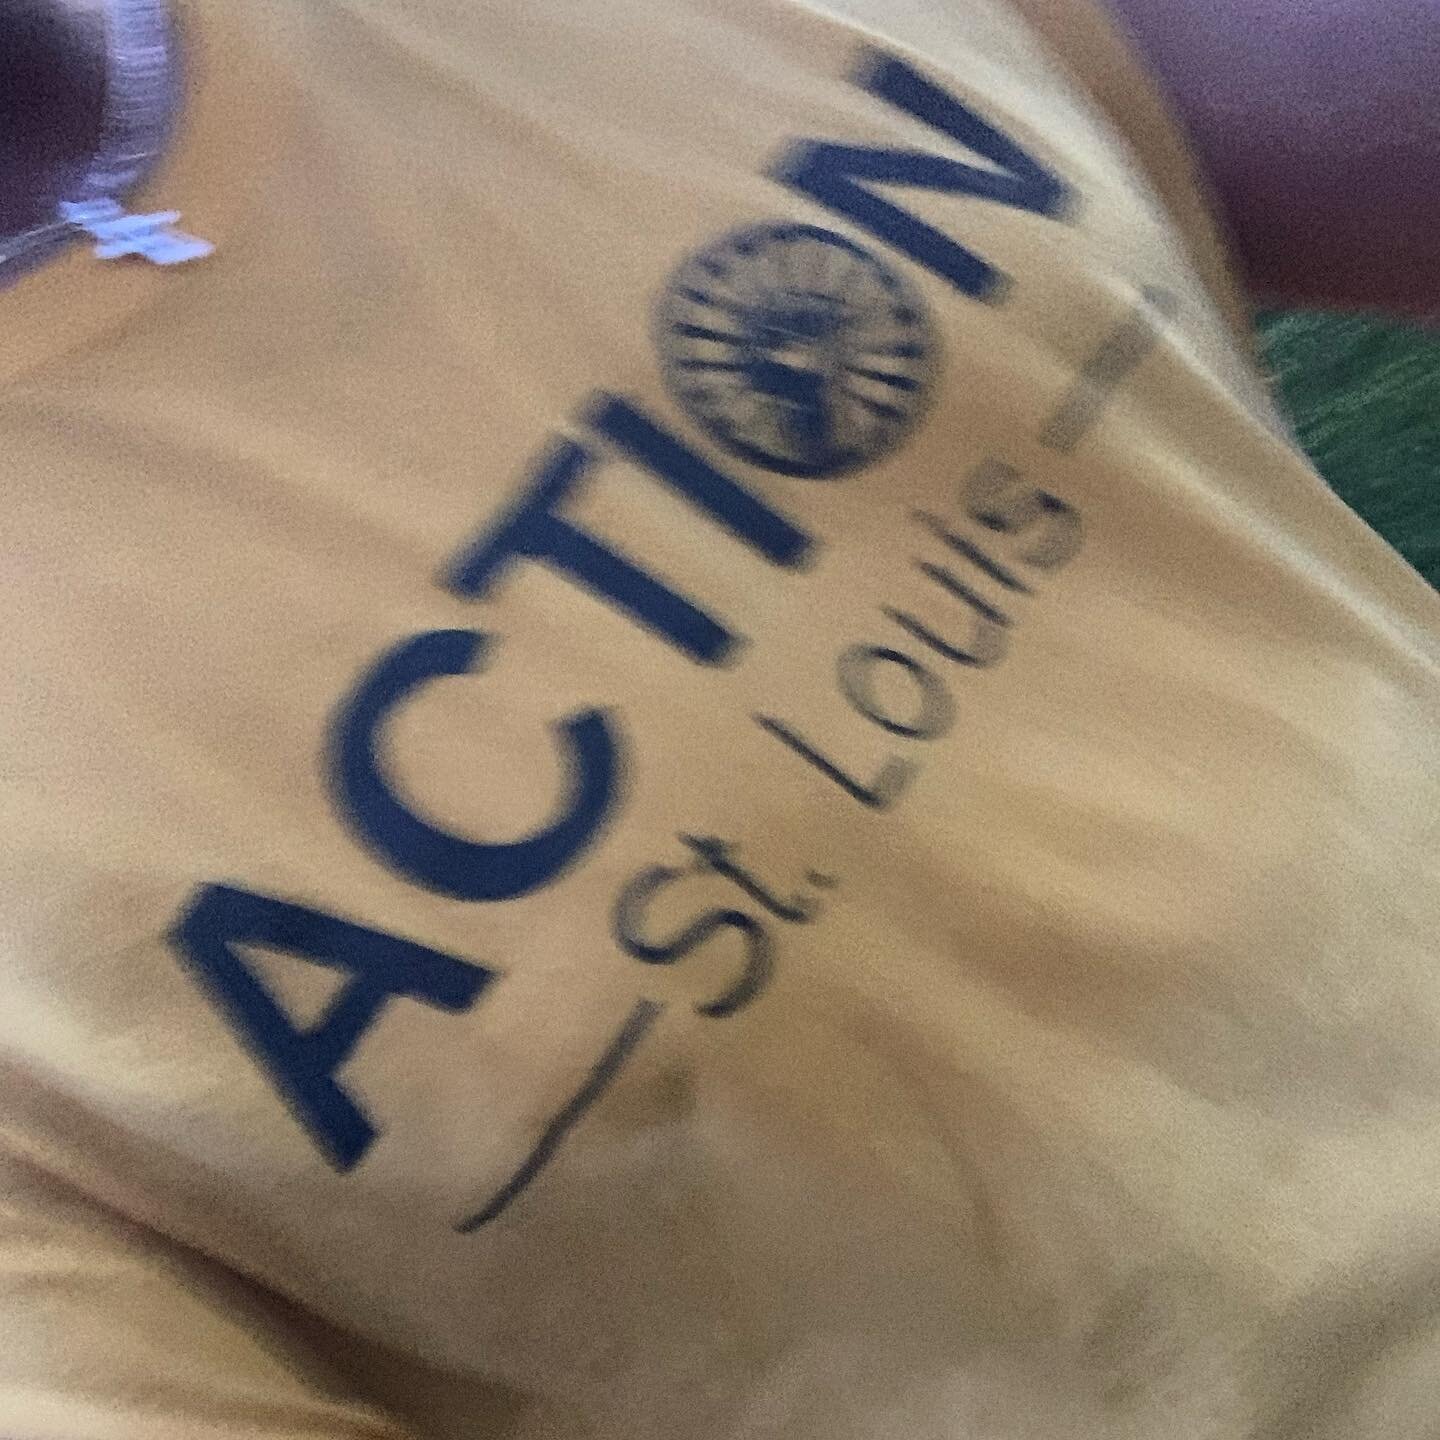 Happy belated 5th birthday to the fam @actionstl @actionstlpower @ikaylareed 

Check the @actblueorg  account #IGot5OnIt

#StLouis is the truth like Sojourner&hellip;

#NightRun #Devotion #Accountability